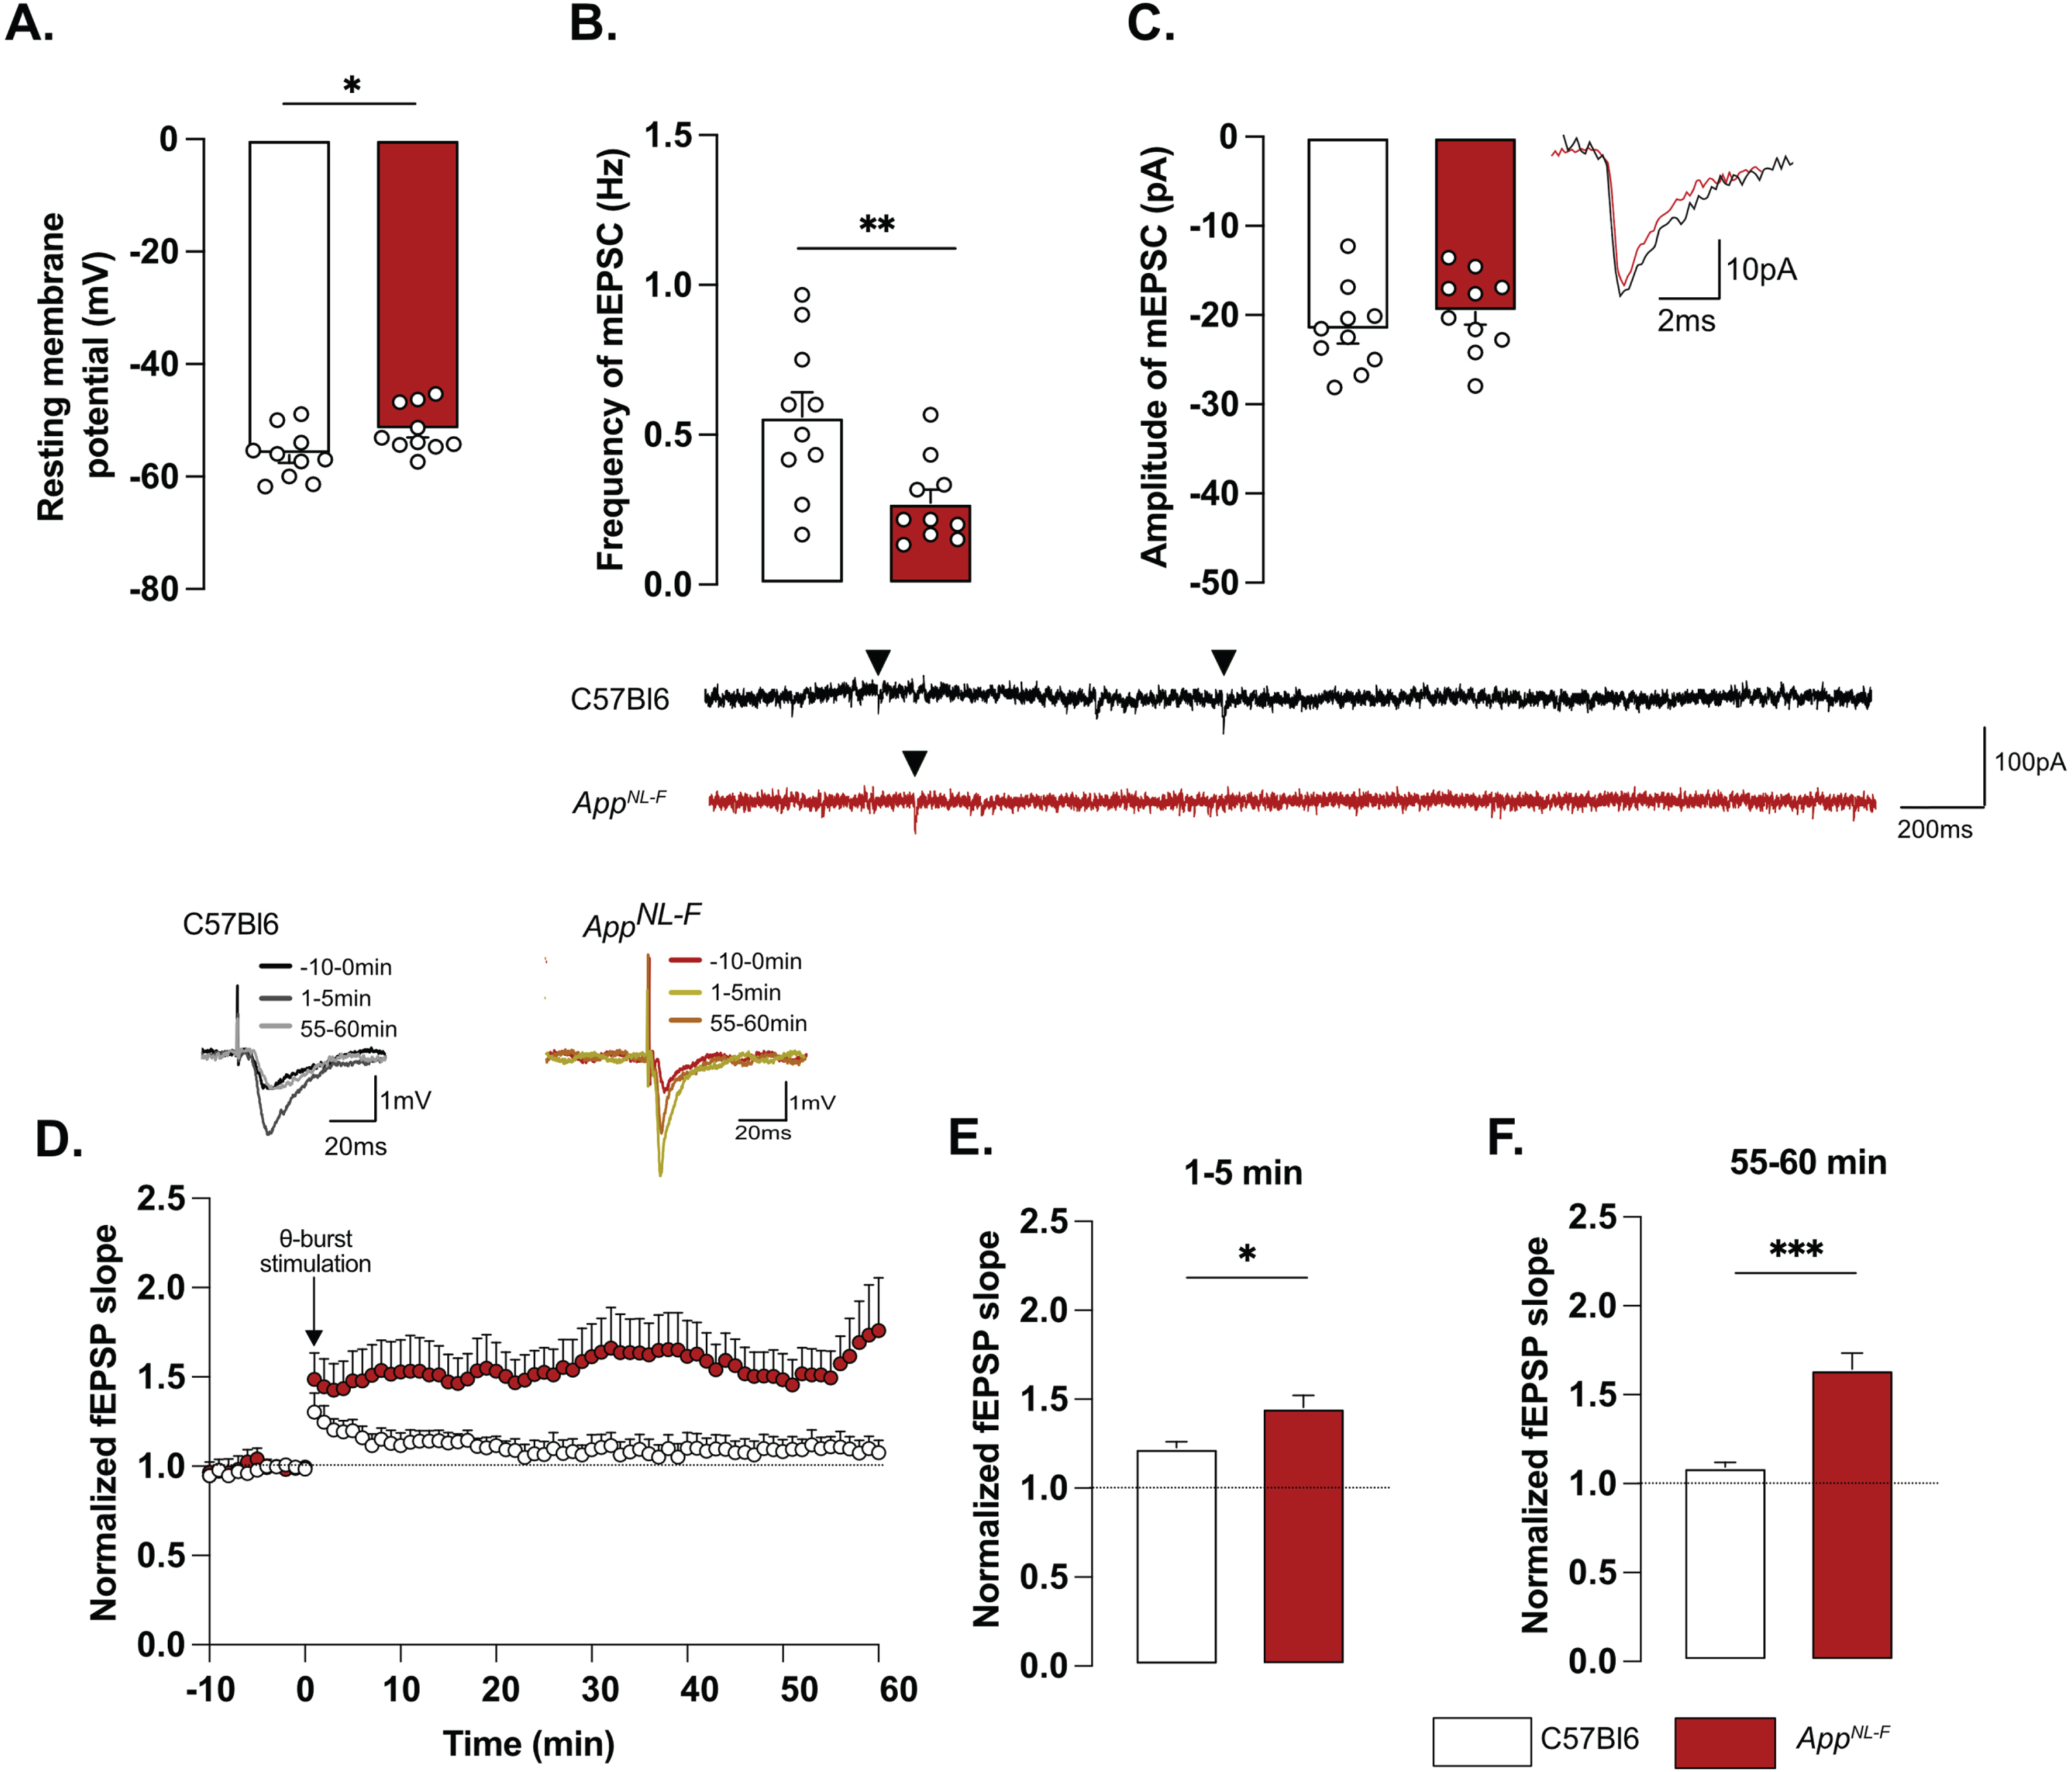 Mistuned synapses in 6-month-old AppNL-F mice. Average resting membrane potential of pyramidal neurons of area CA1 of the hippocampus is significantly higher in AppNL-F mice compared to C57Bl6 mice (A). Recordings of mEPSC in the same cells show reduced frequency of events (B) in AppNL-F compared to C57Bl6 mice, with no changes in amplitude (C). Representative traces for mEPSC are shown under graphs. Student t-test, **p < 0.01 statistically significant as shown. For all variables, C57Bl6: n = 10 cells recorded in seven animals, AppNL-F: n = 10 cells recorded in seven animals. fEPSP were recorded after Schaffer collaterals stimulation in the area CA3. We recorded the response of post-synaptic neurons in area CA1. A subthreshold theta-burst (θ-burst) stimulation was applied and fEPSP magnitude was monitored for 1 h. The fEPSP slope was normalized to the average baseline value and displayed as the average per minute (D). Representative traces are shown on top. The θ-burst induced a significant potentiation in both AppNL-F and C57Bl6 mice at 0–5 min after stimulation (E). However, at 55–60 min, the fEPSP magnitude is almost back to baseline in C57Bl6 mice and is significantly increased in AppNL-F mice (F). Student t-test: *p < 0.05, ***p < 0.001 statistically significant as shown. C57Bl6: n = 6 recordings in three animals, AppNL-F: n = 9 recordings in five animals.